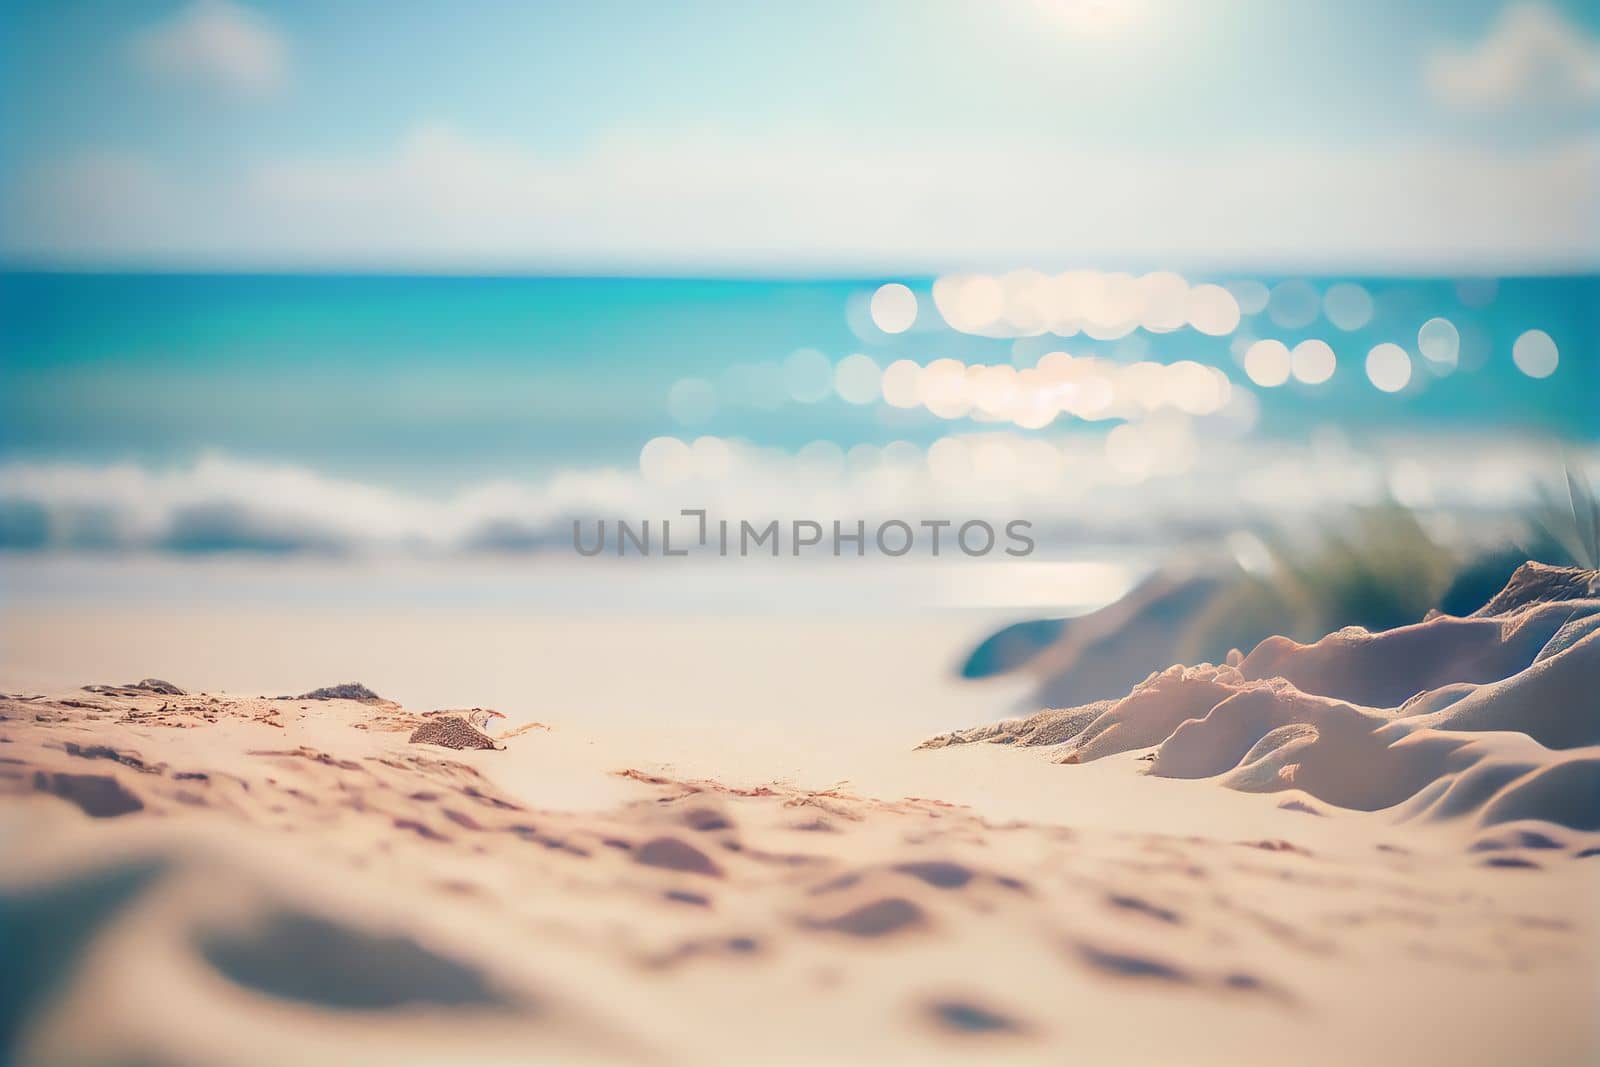 Seascape abstract beach background image. blur bokeh light of calm sea and sky. Focus on sand foreground